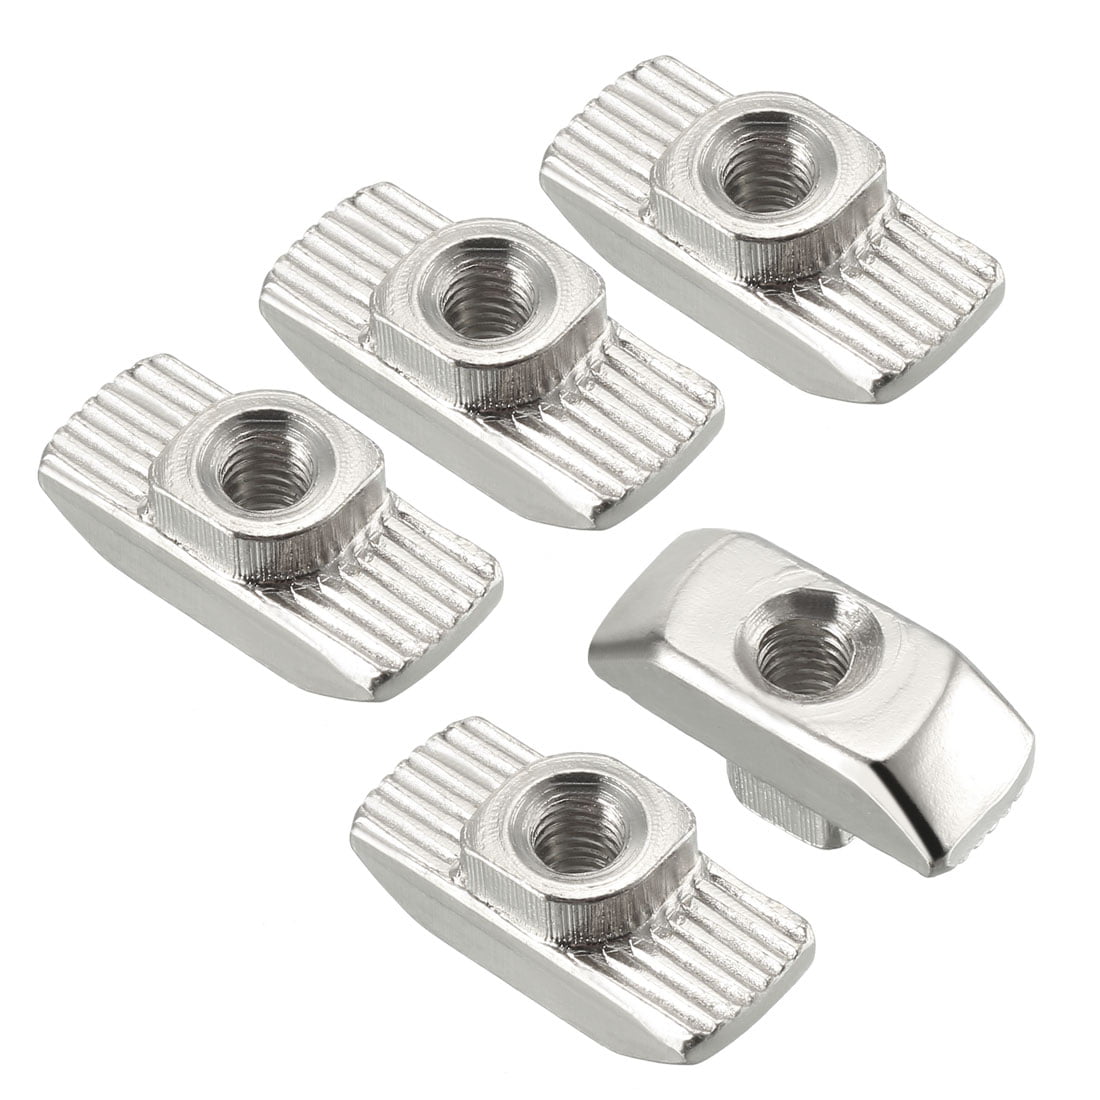 Slot T slot 6 T nuts M4 Square Solid Slide in sliding tee Aluminum Extrusion V 